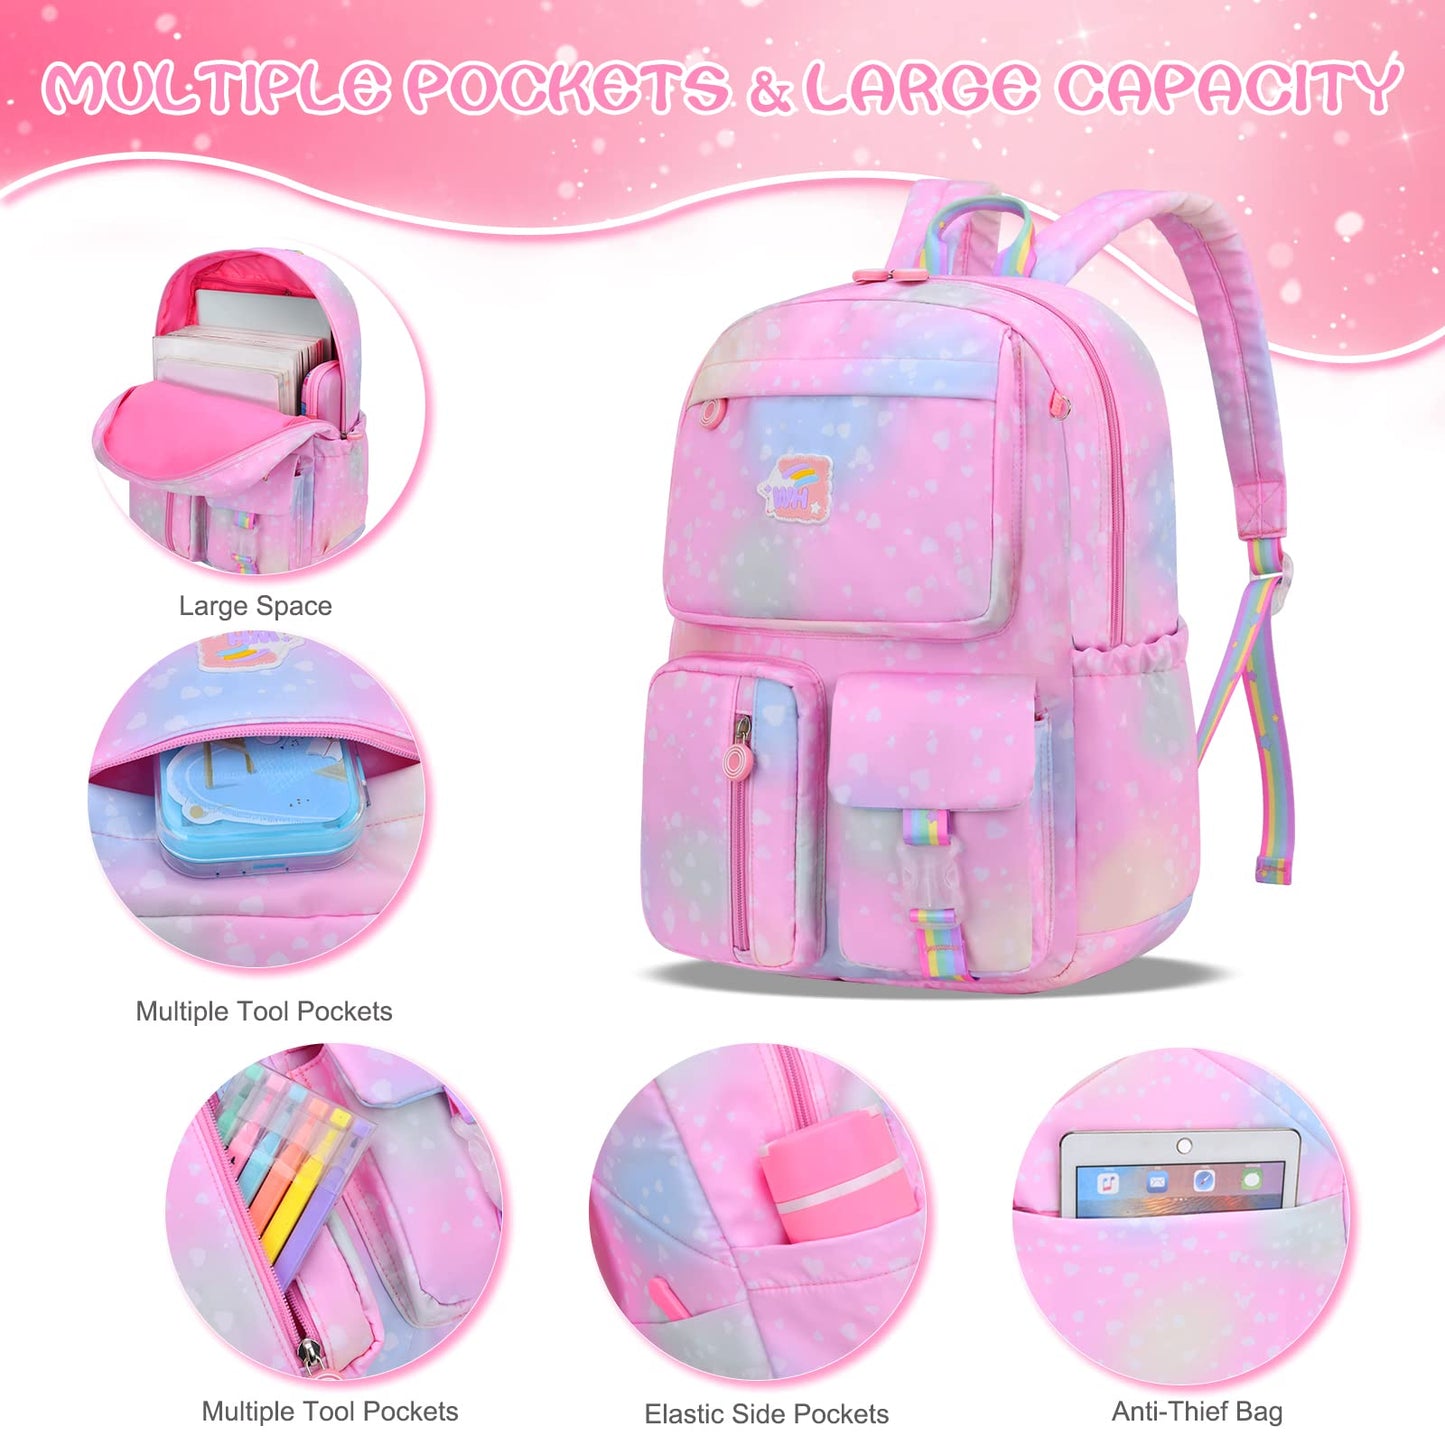 School Backpacks for Girls,Back to School Supplies with Lunch Bag,Cute Backpack Gifts for Daughter Niece Sister Friend